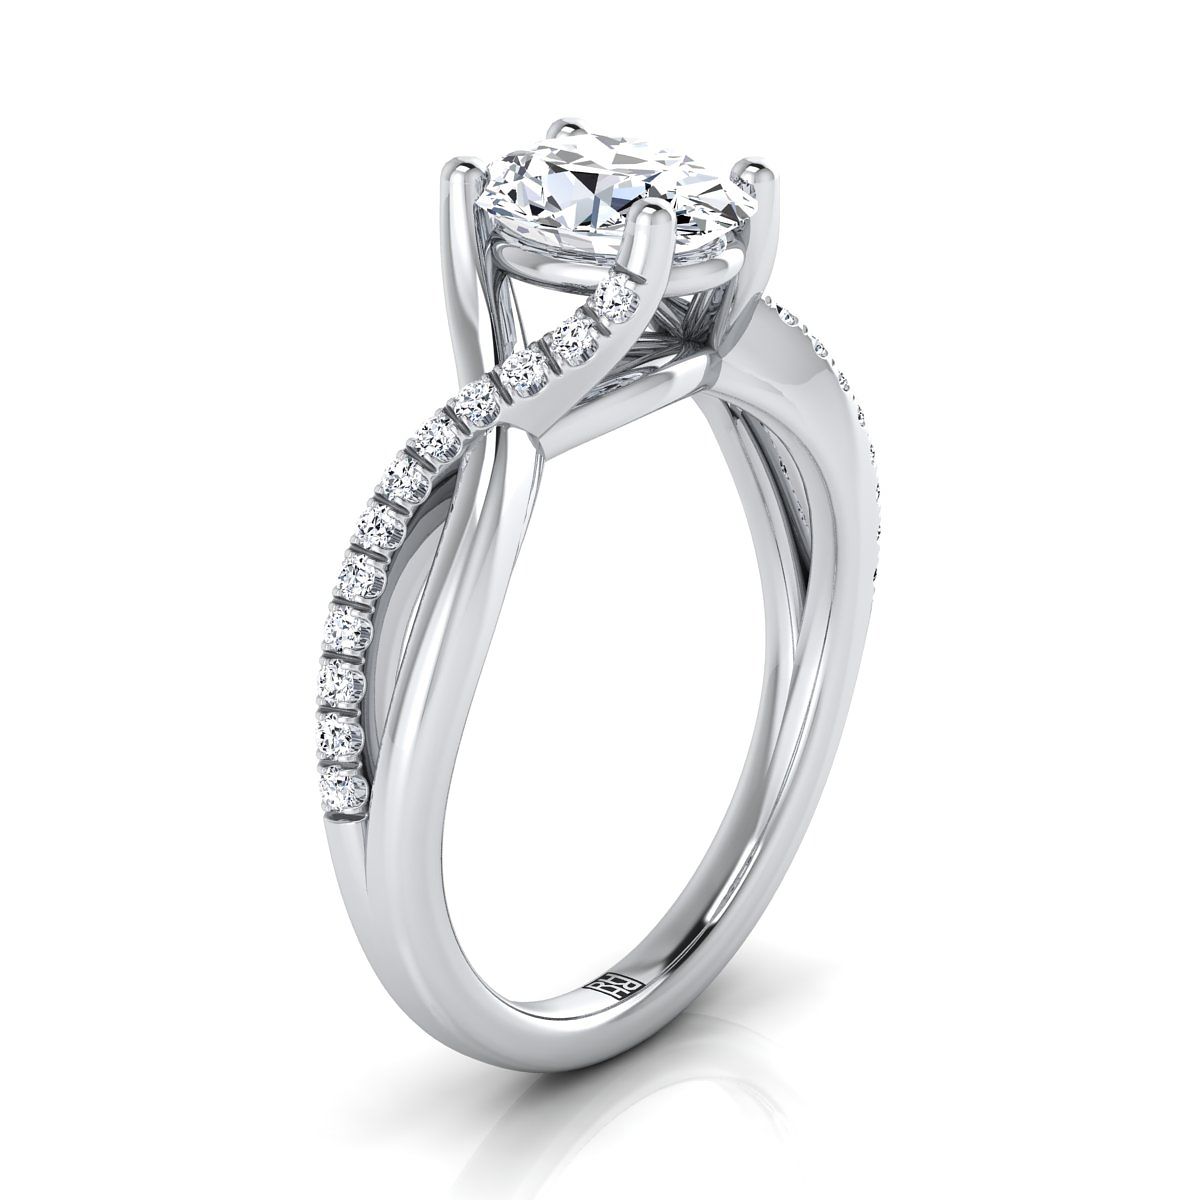 18K White Gold Oval Bypass Pave Diamond Twist Engagement Ring -1/6ctw